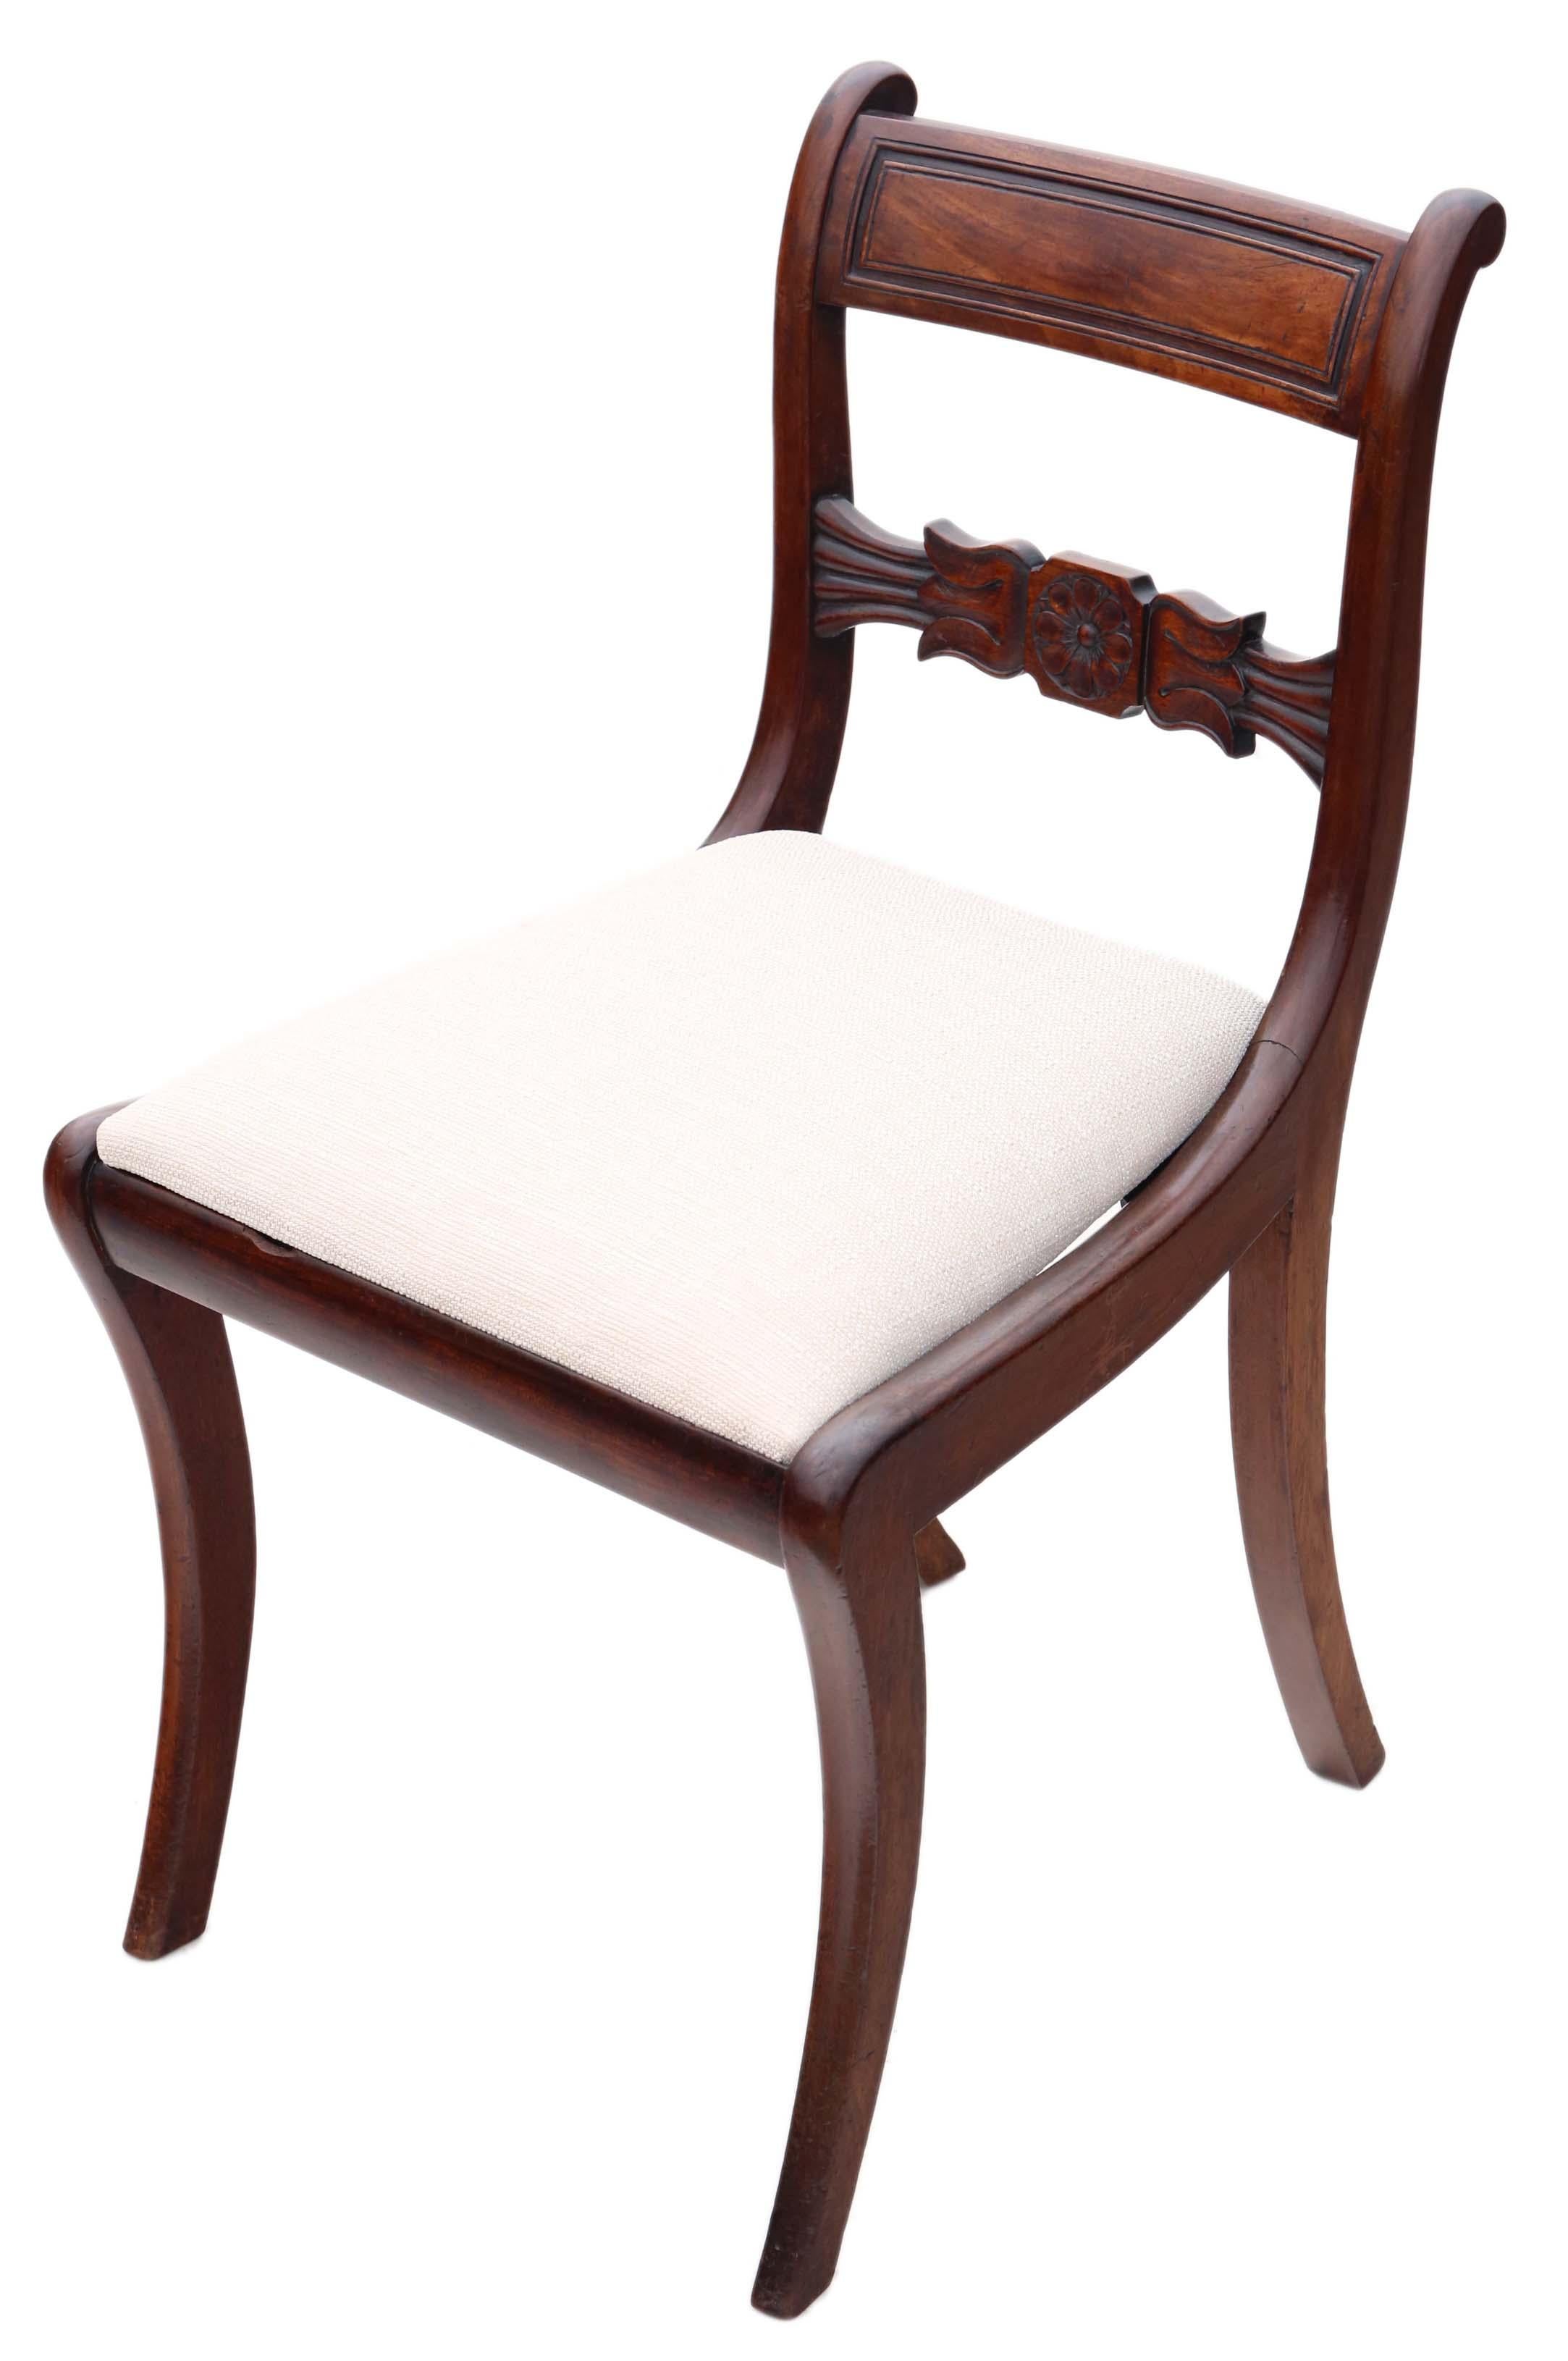 Early 19th Century Antique Set of 4 Regency circa 1825 Mahogany Dining Chairs, 19th Century